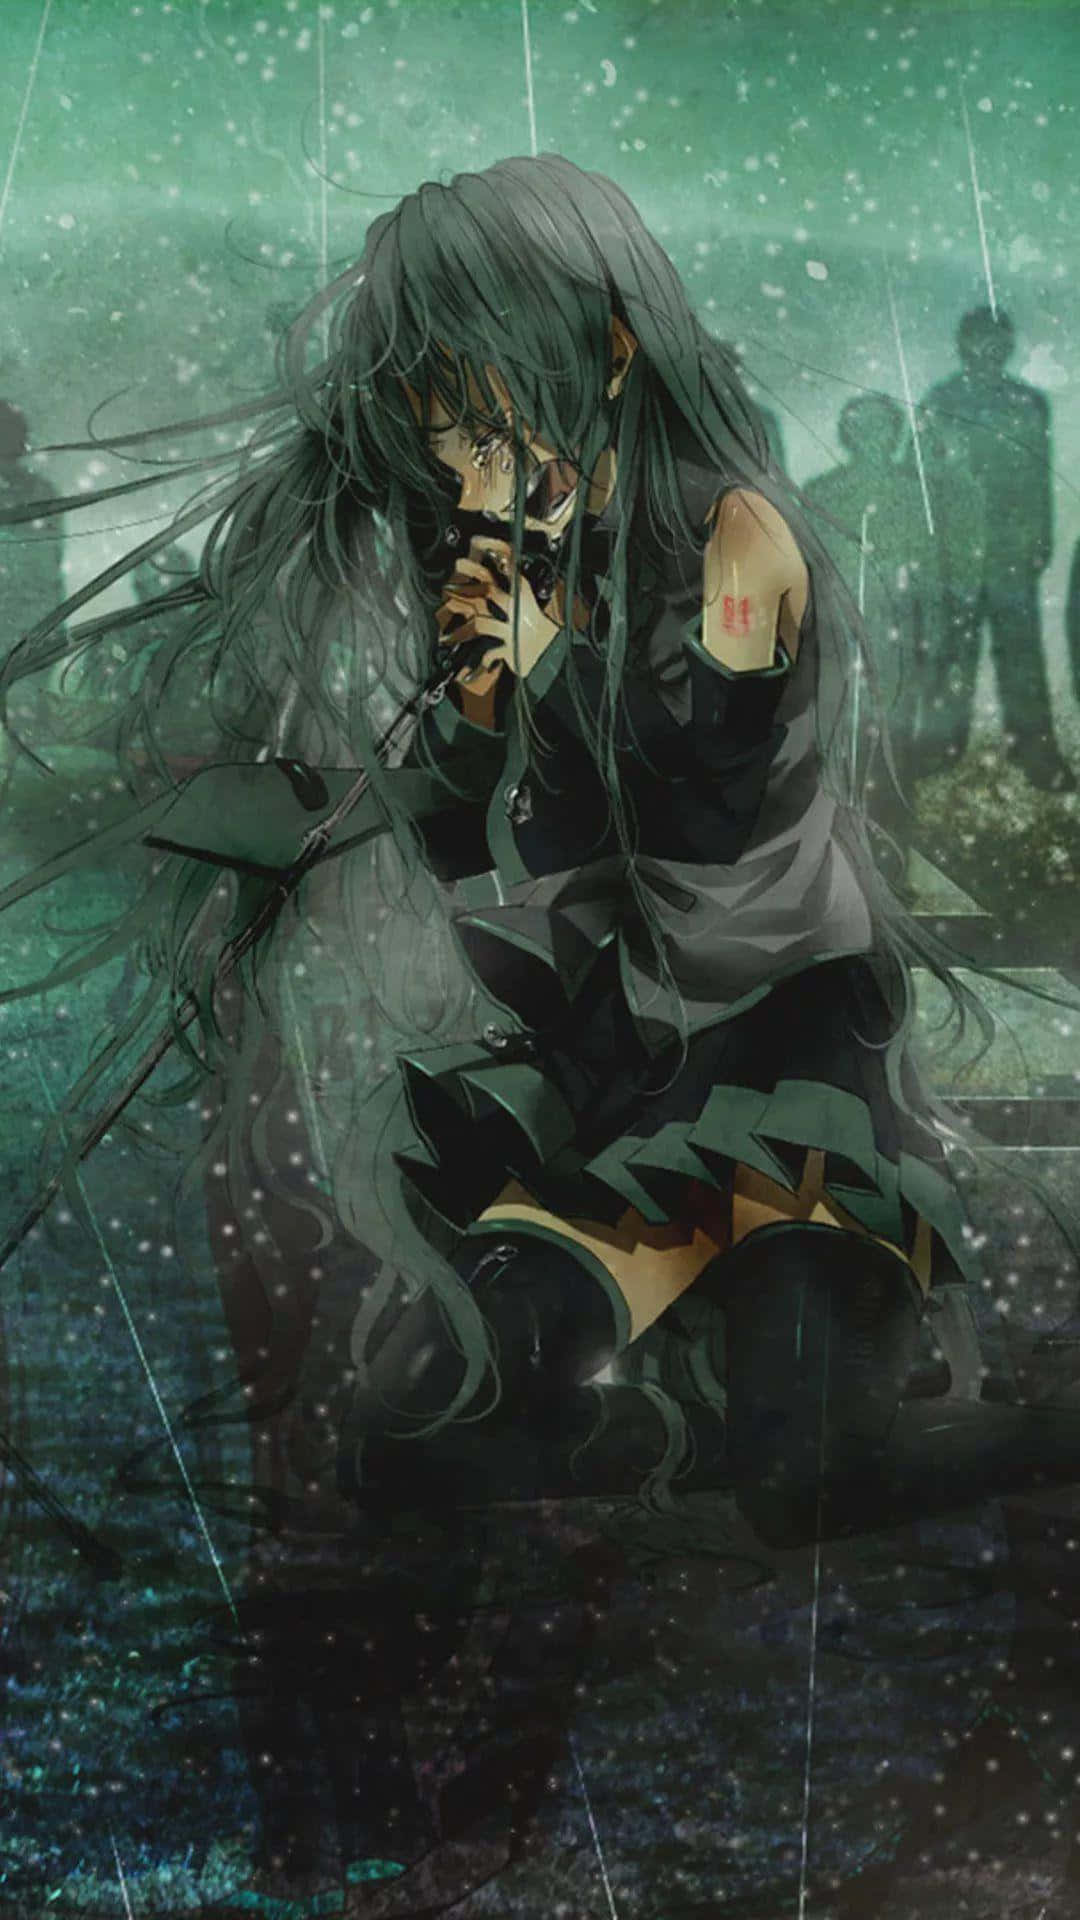 Anime Woman Weeping Depression Wallpaper